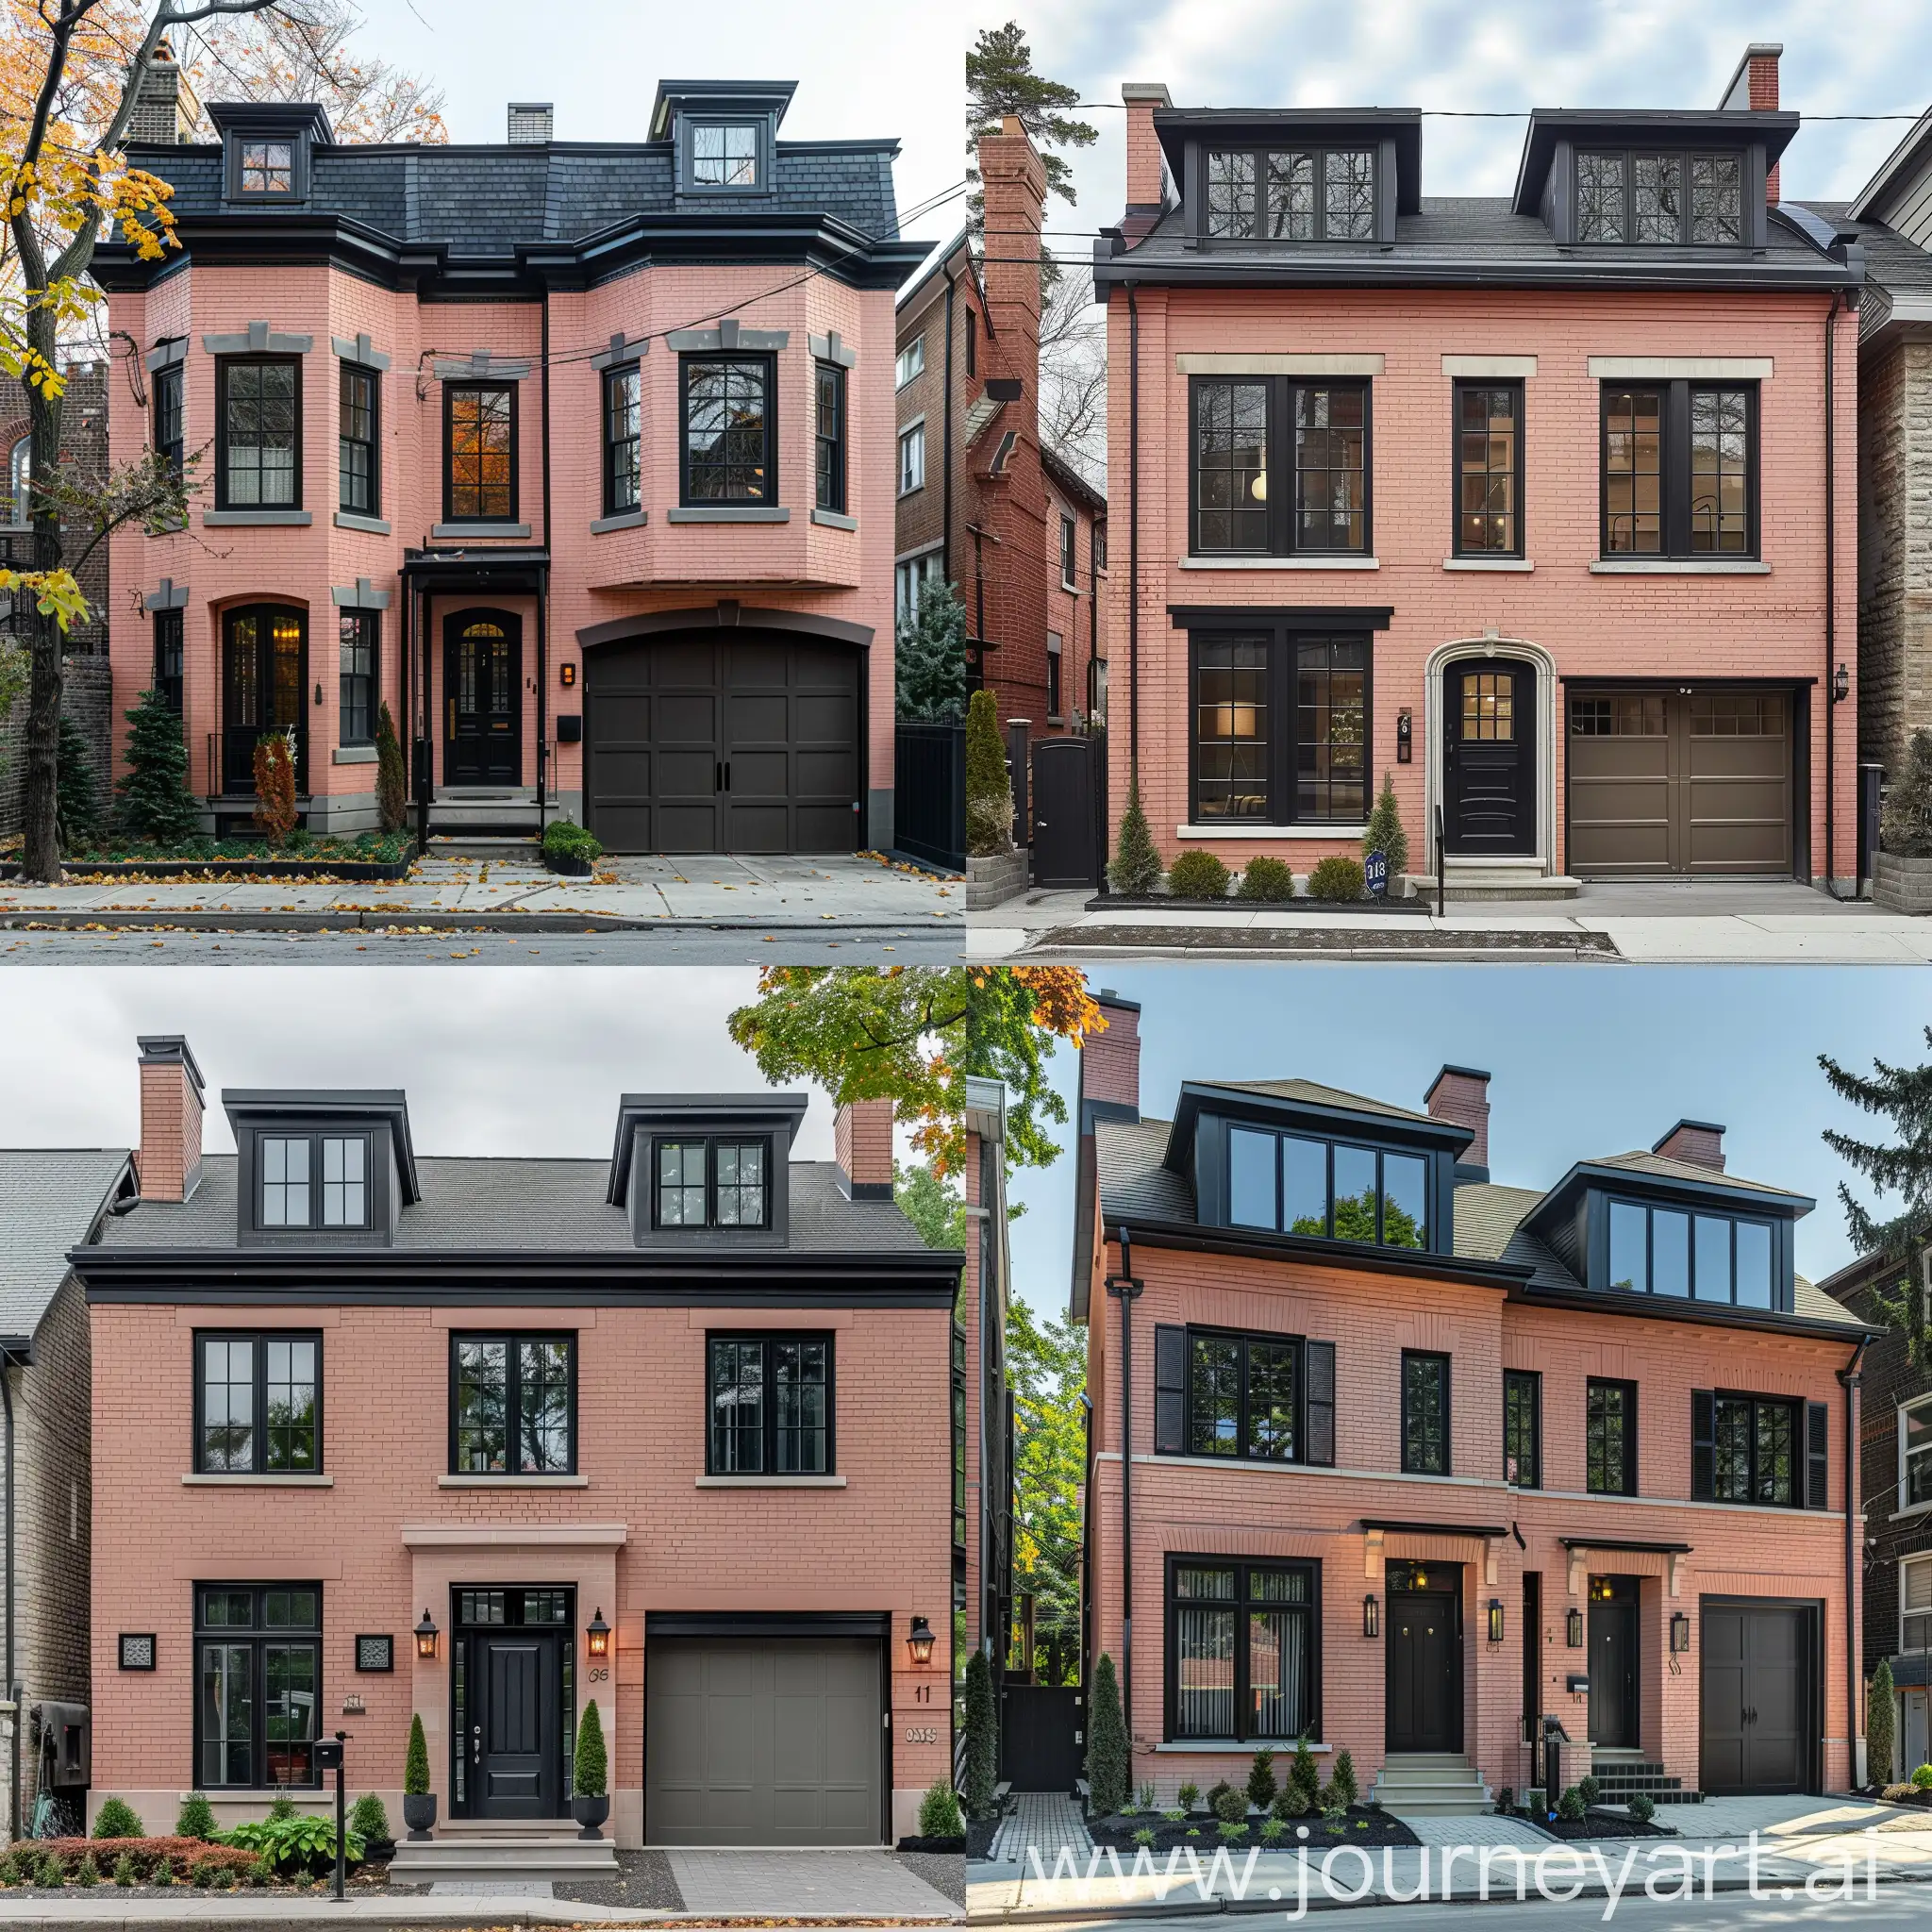 Show me a two storey residential corner lot home with salmon pink brick, black windows, black doors, and a dark taupe colored two door garage on the right